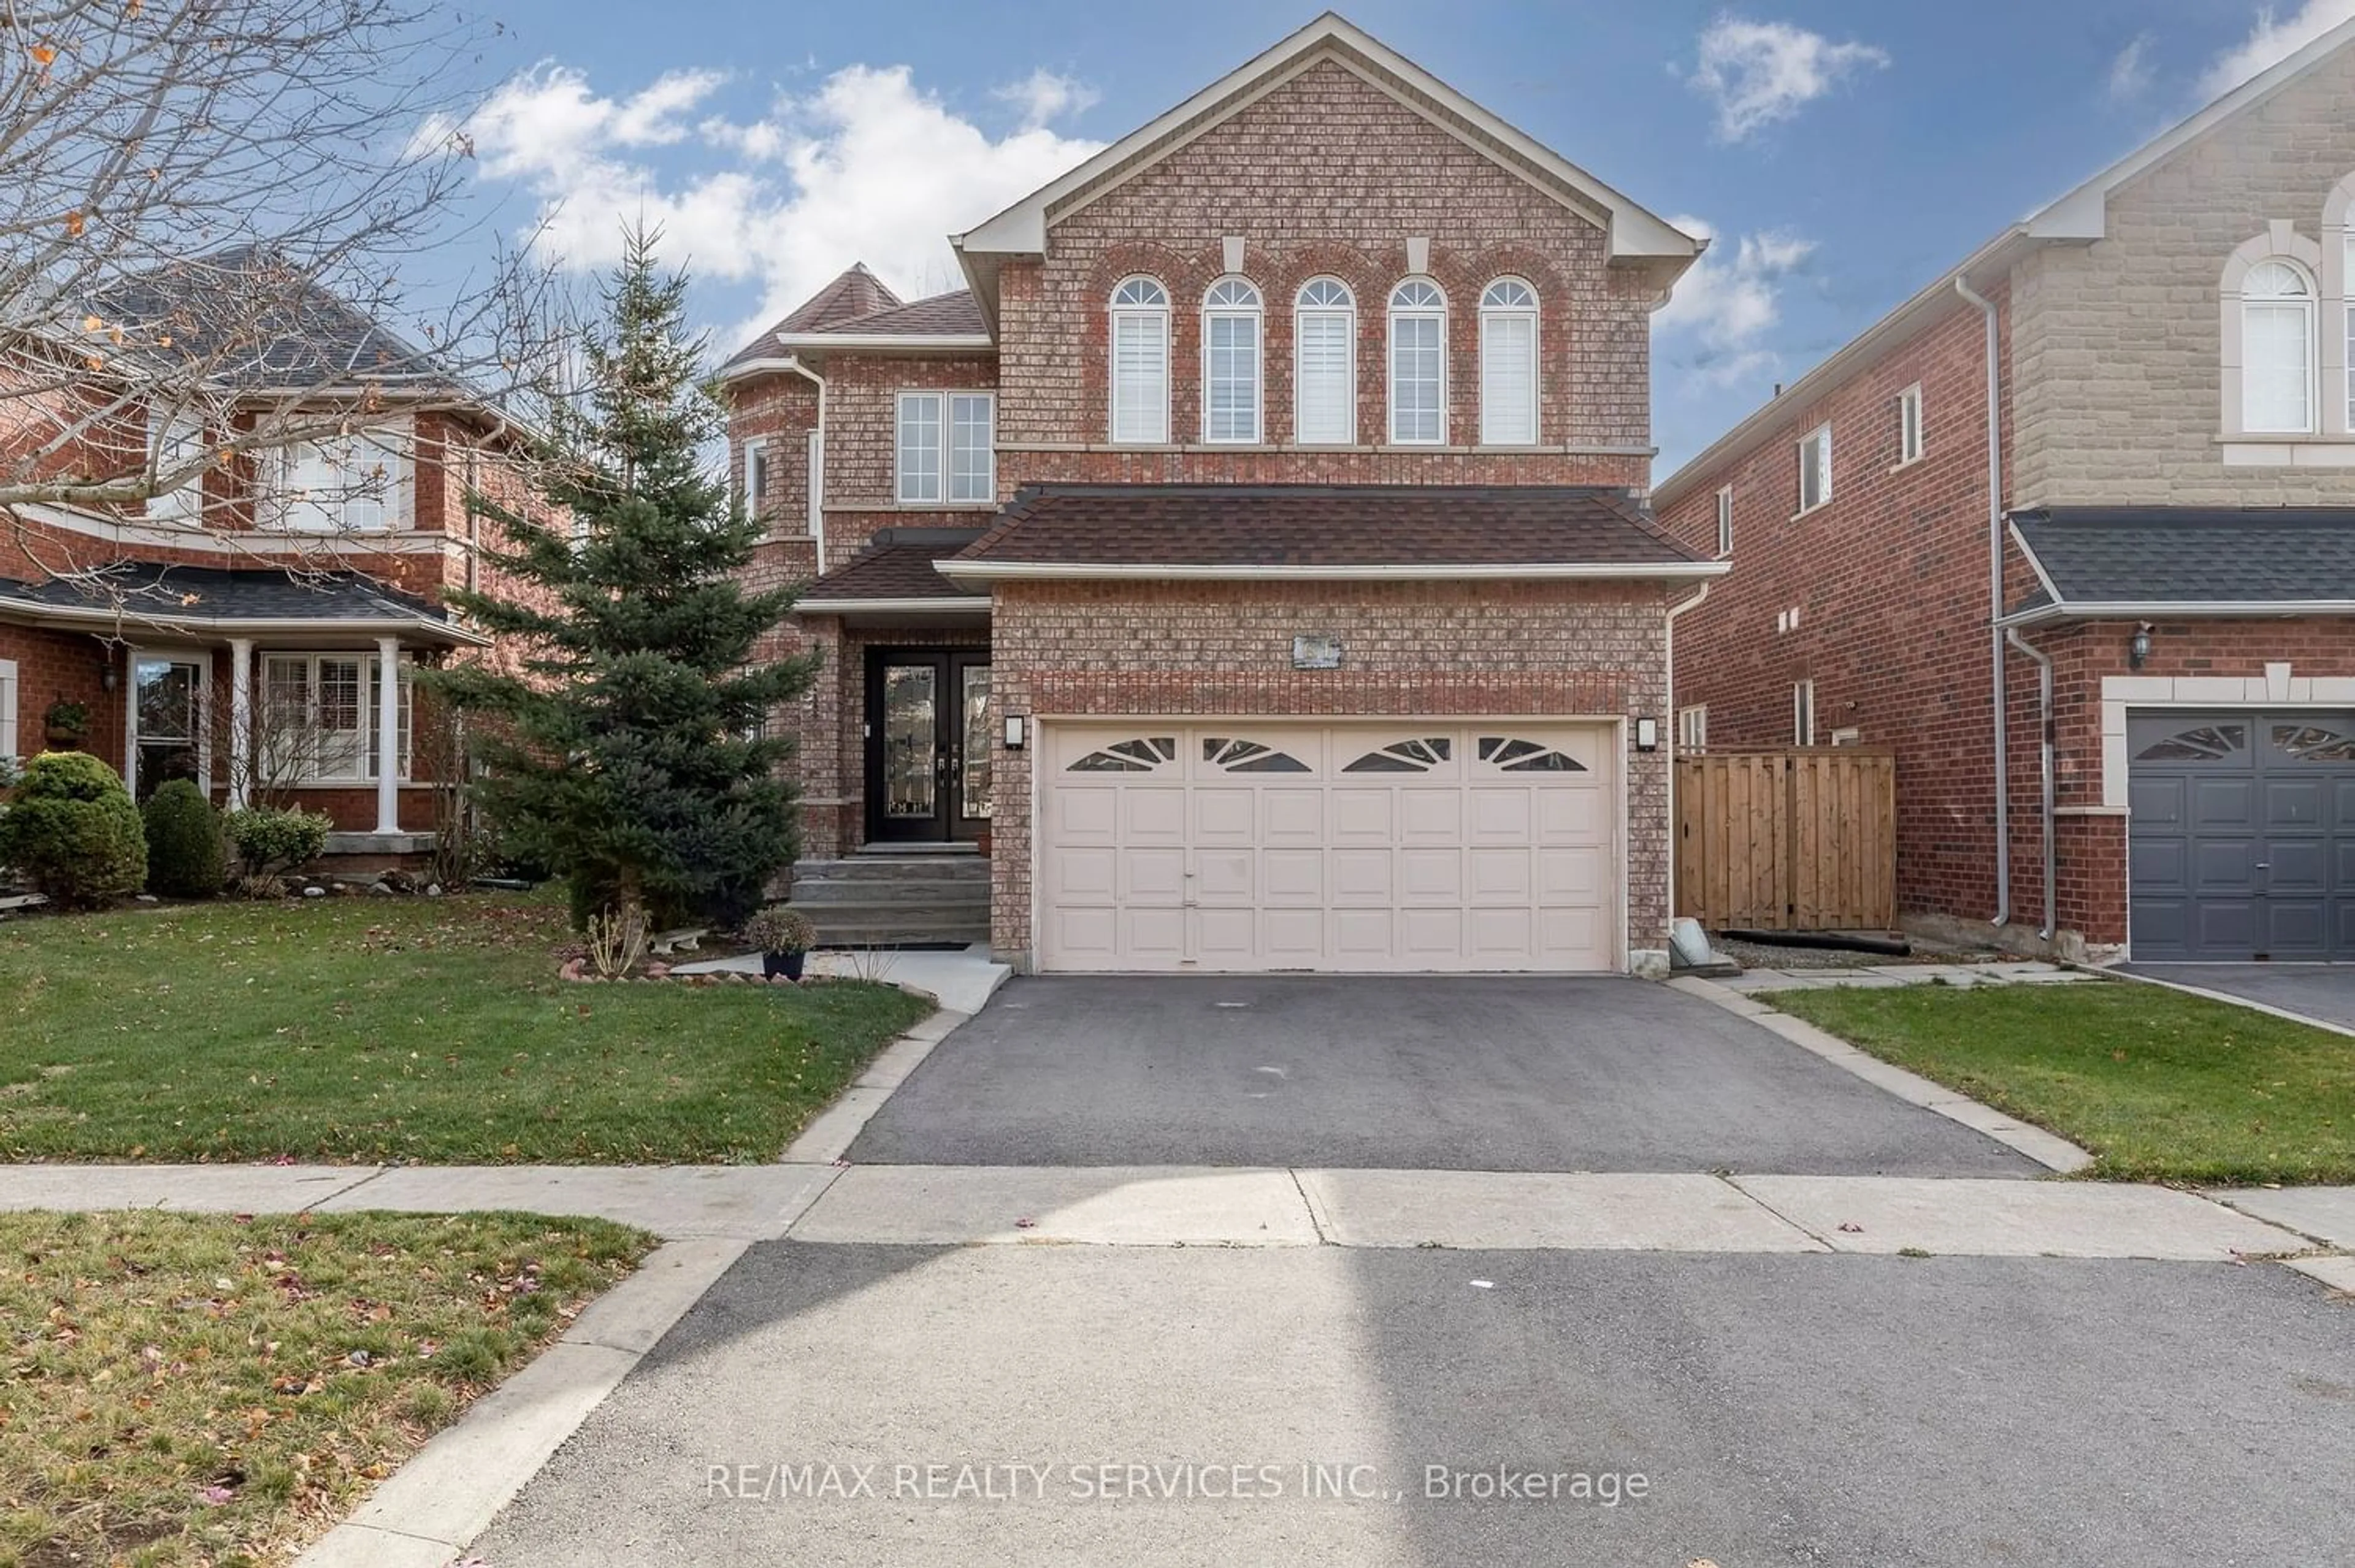 Home with brick exterior material for 61 Royal Valley Dr, Caledon Ontario L7C 1A9